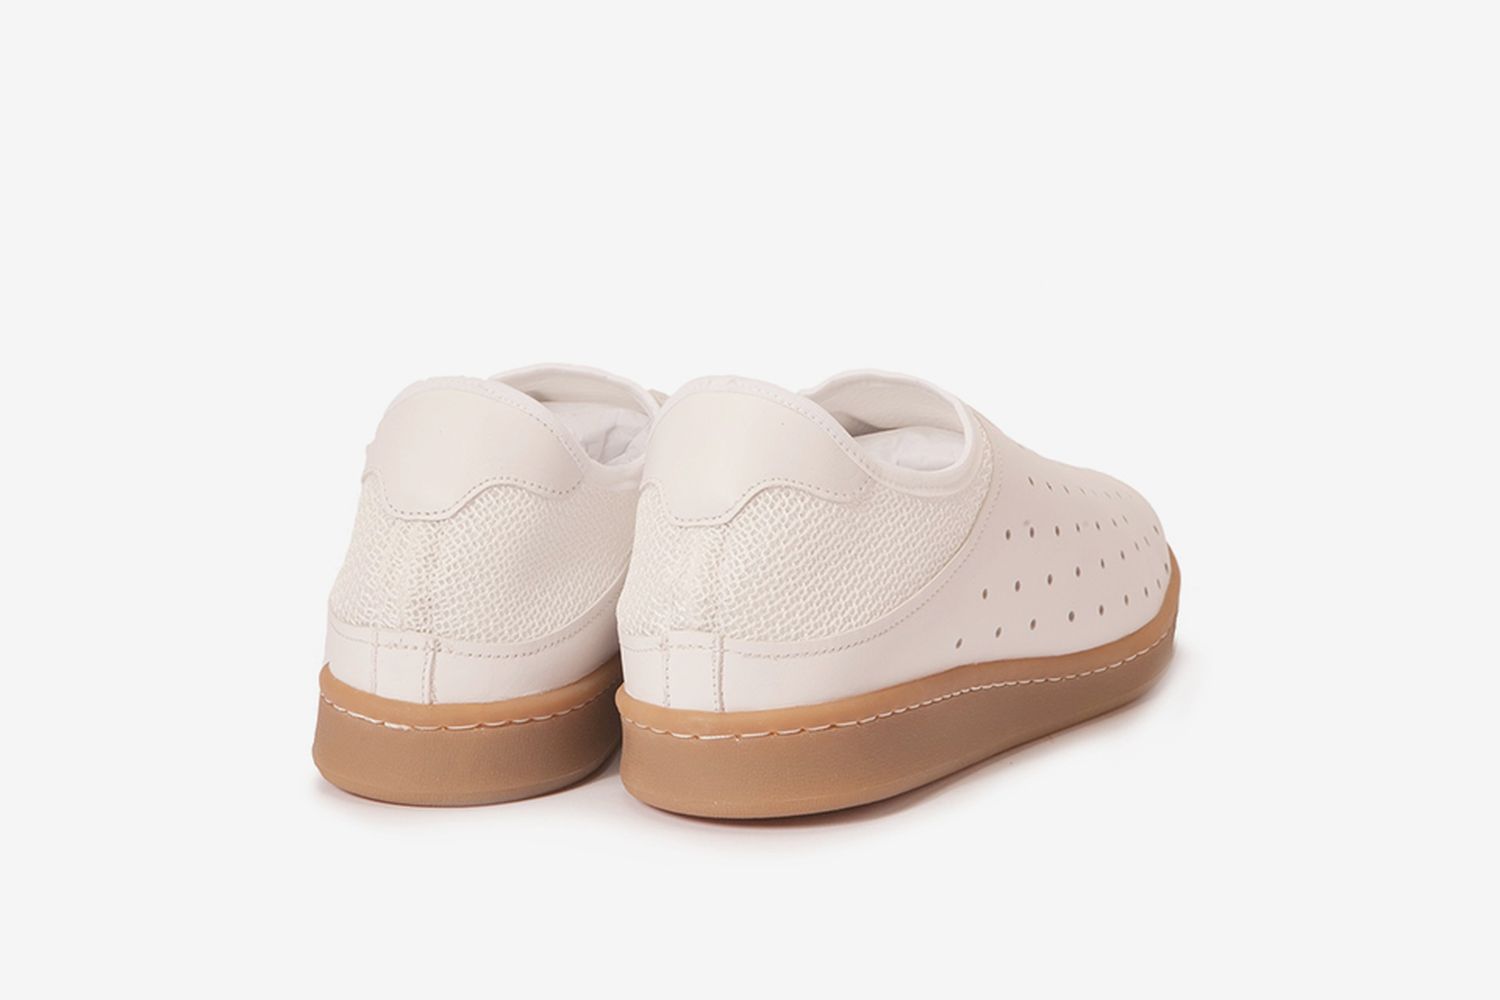 Our Legacy Hermit Slip-On